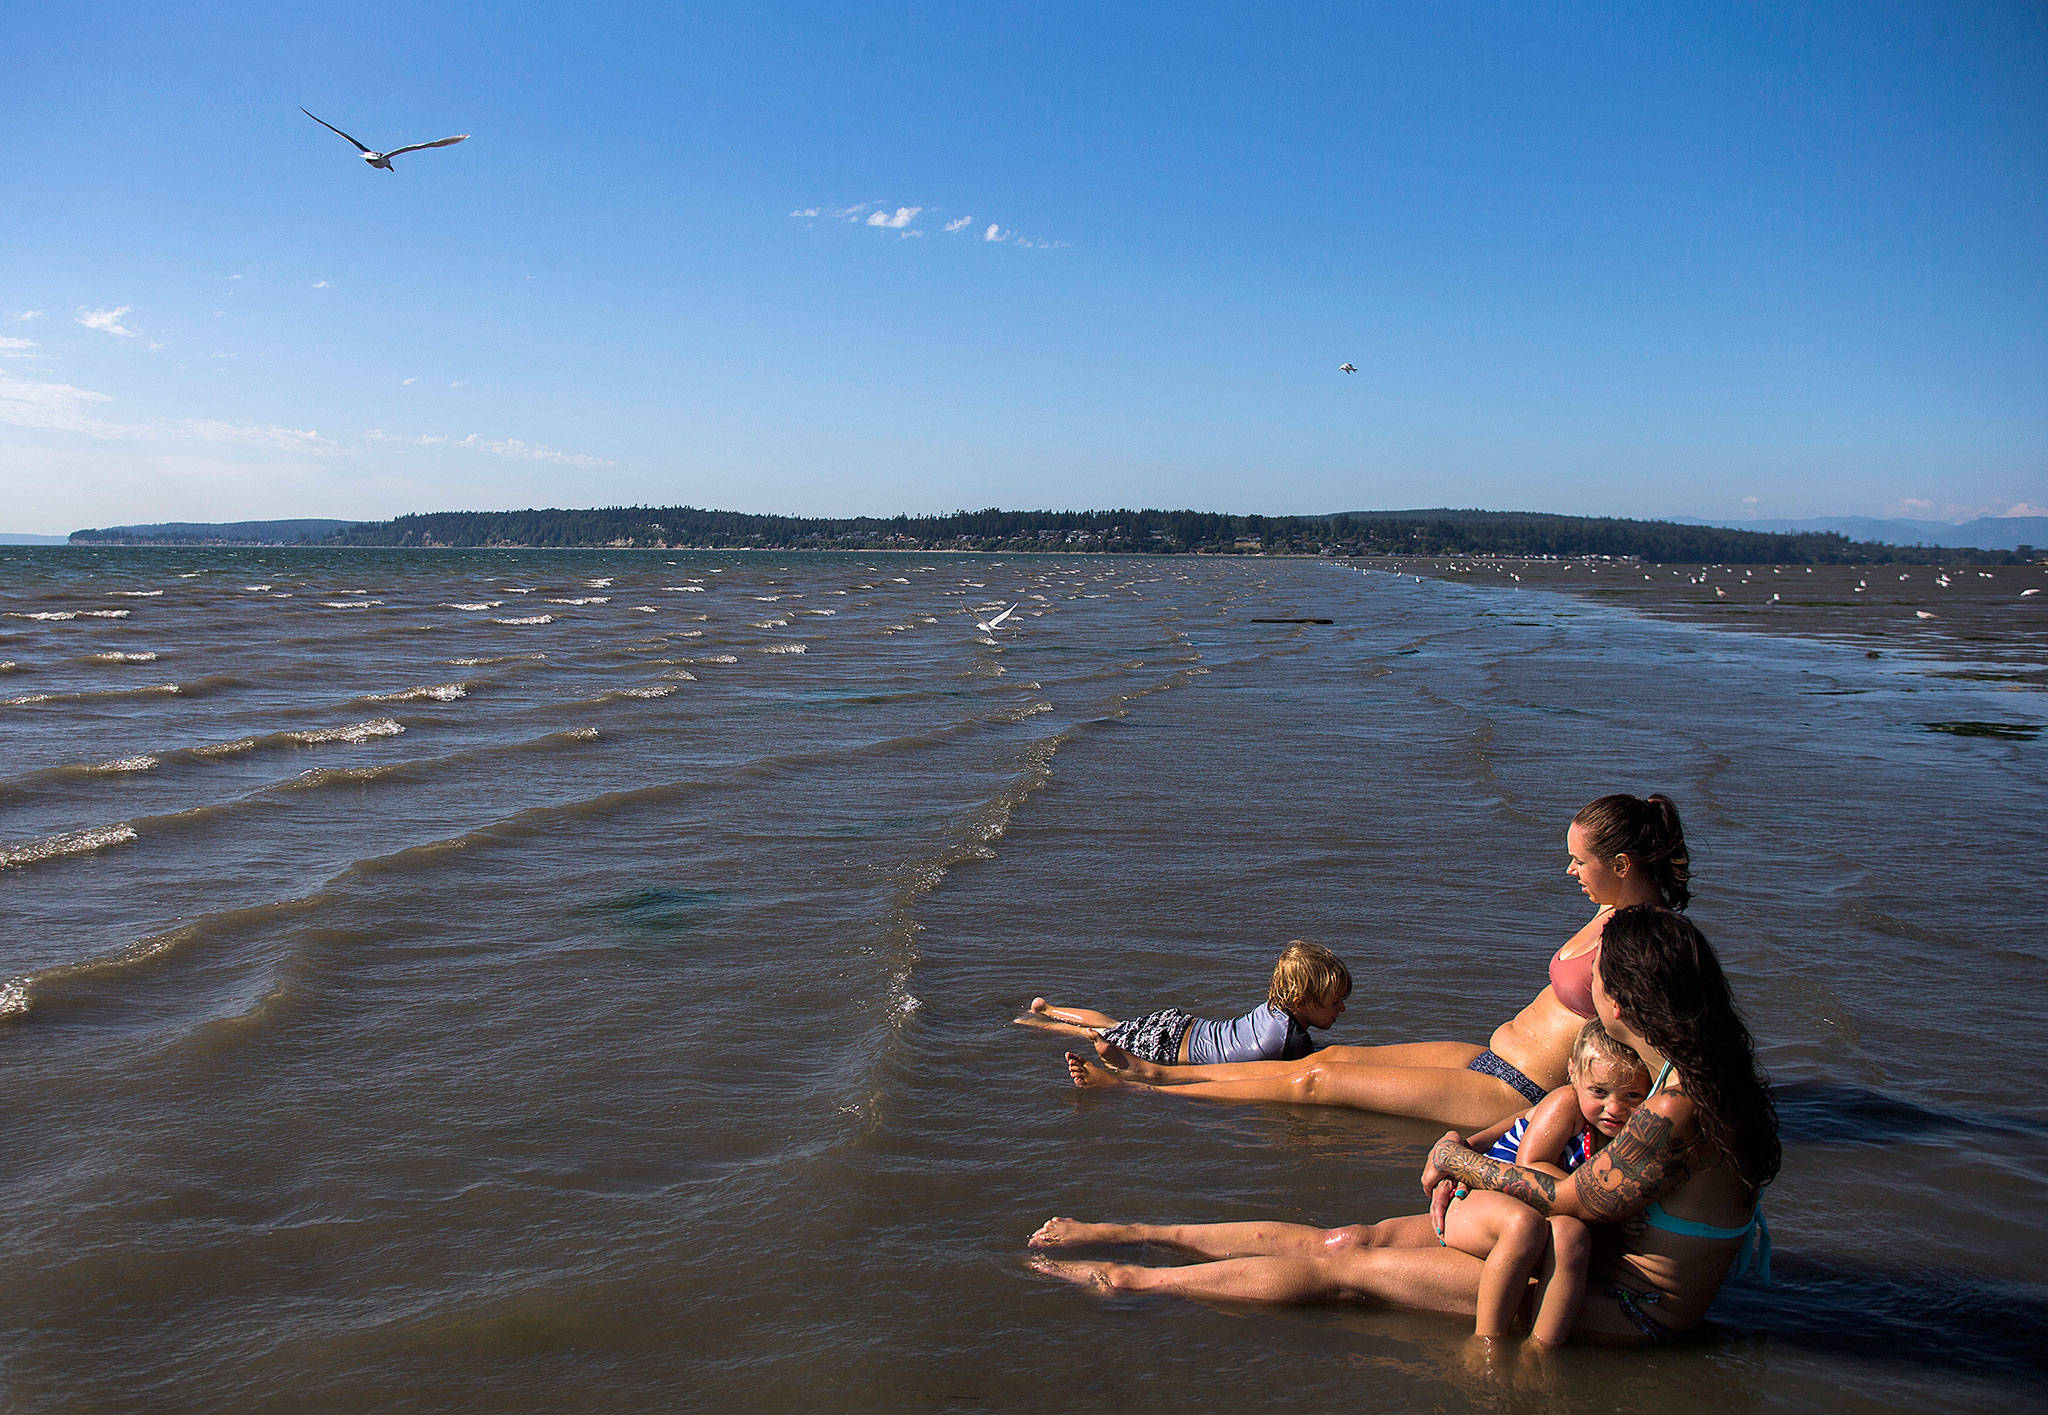 Milissa Simons (right) holds Jet Juliann, 3, while Ashley Elledge (center) watches Lincoln Ballard, 3, swim in the water off of Jetty Island on Thursday in Everett. (Olivia Vanni / The Herald)